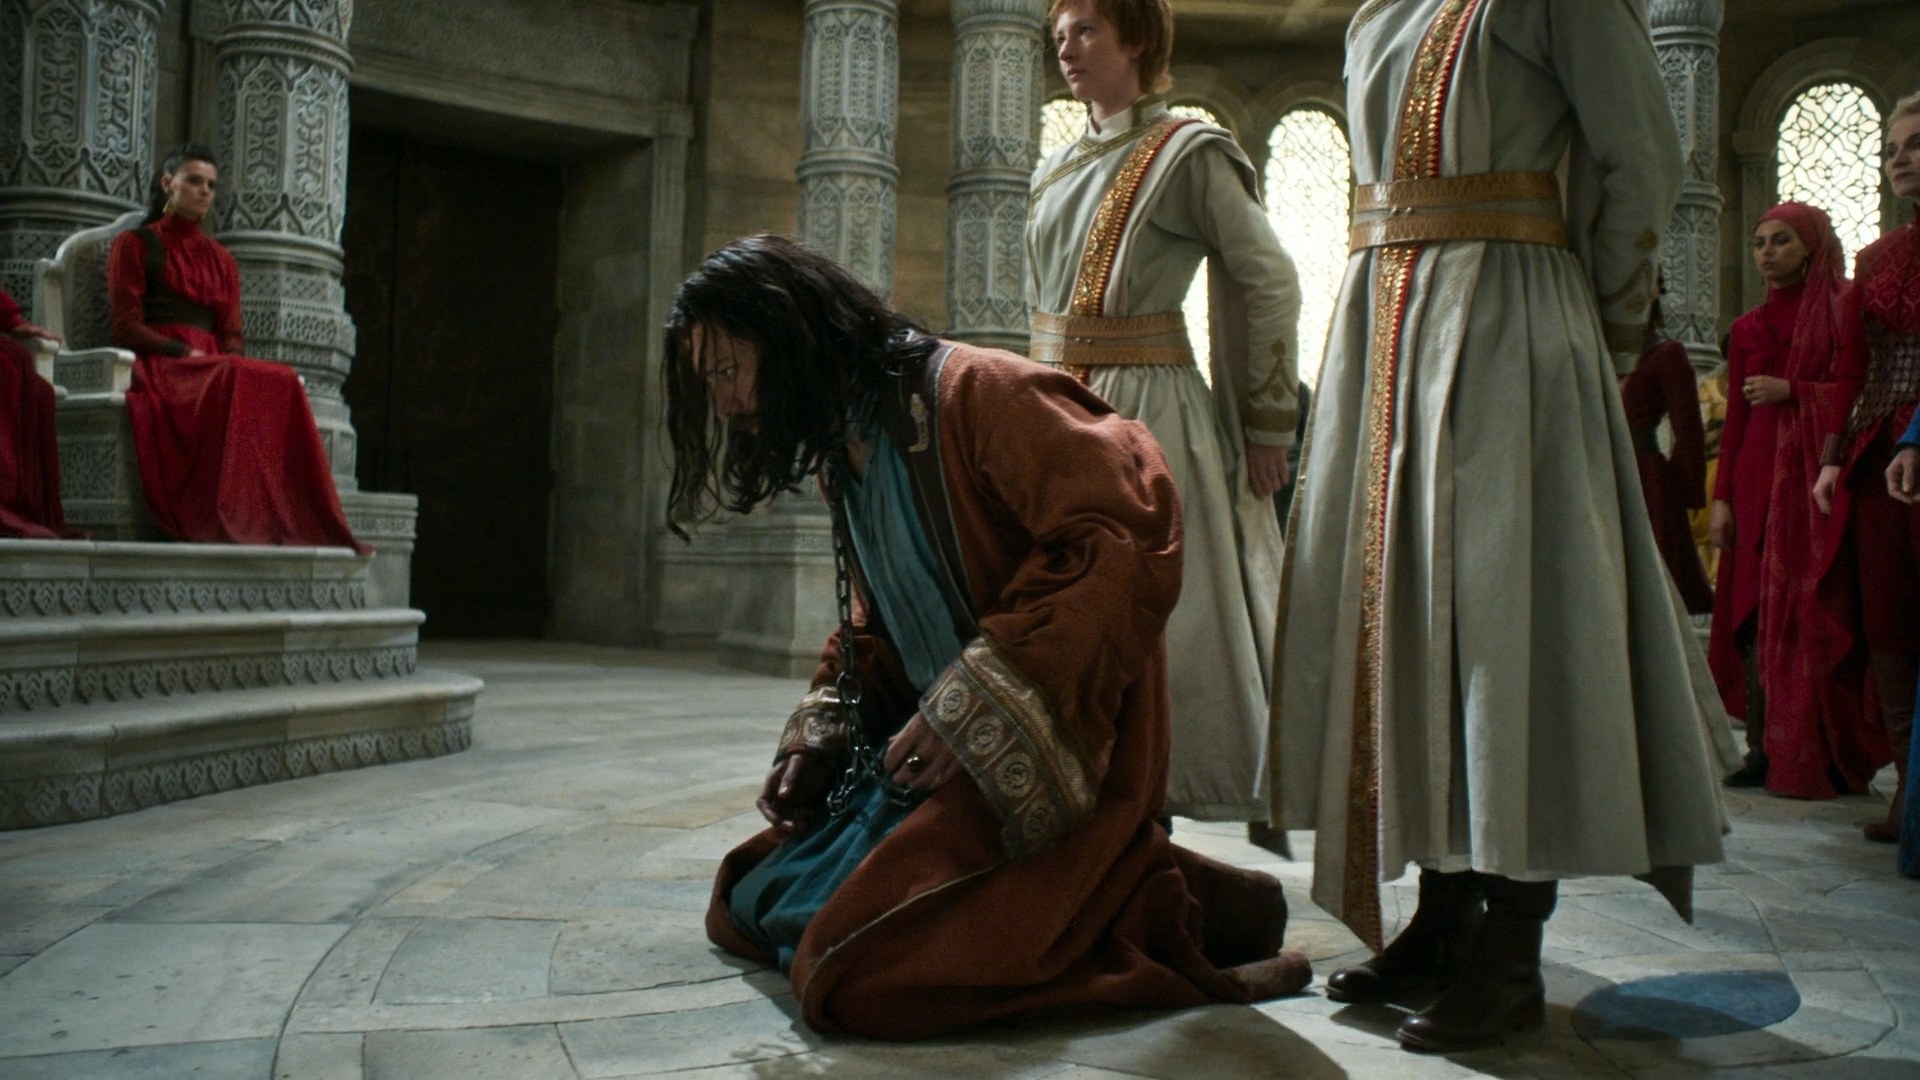 A shot of Logain in chains being forced to his knees in the Hall of the Tower by white-and-gold robed Tower Guards